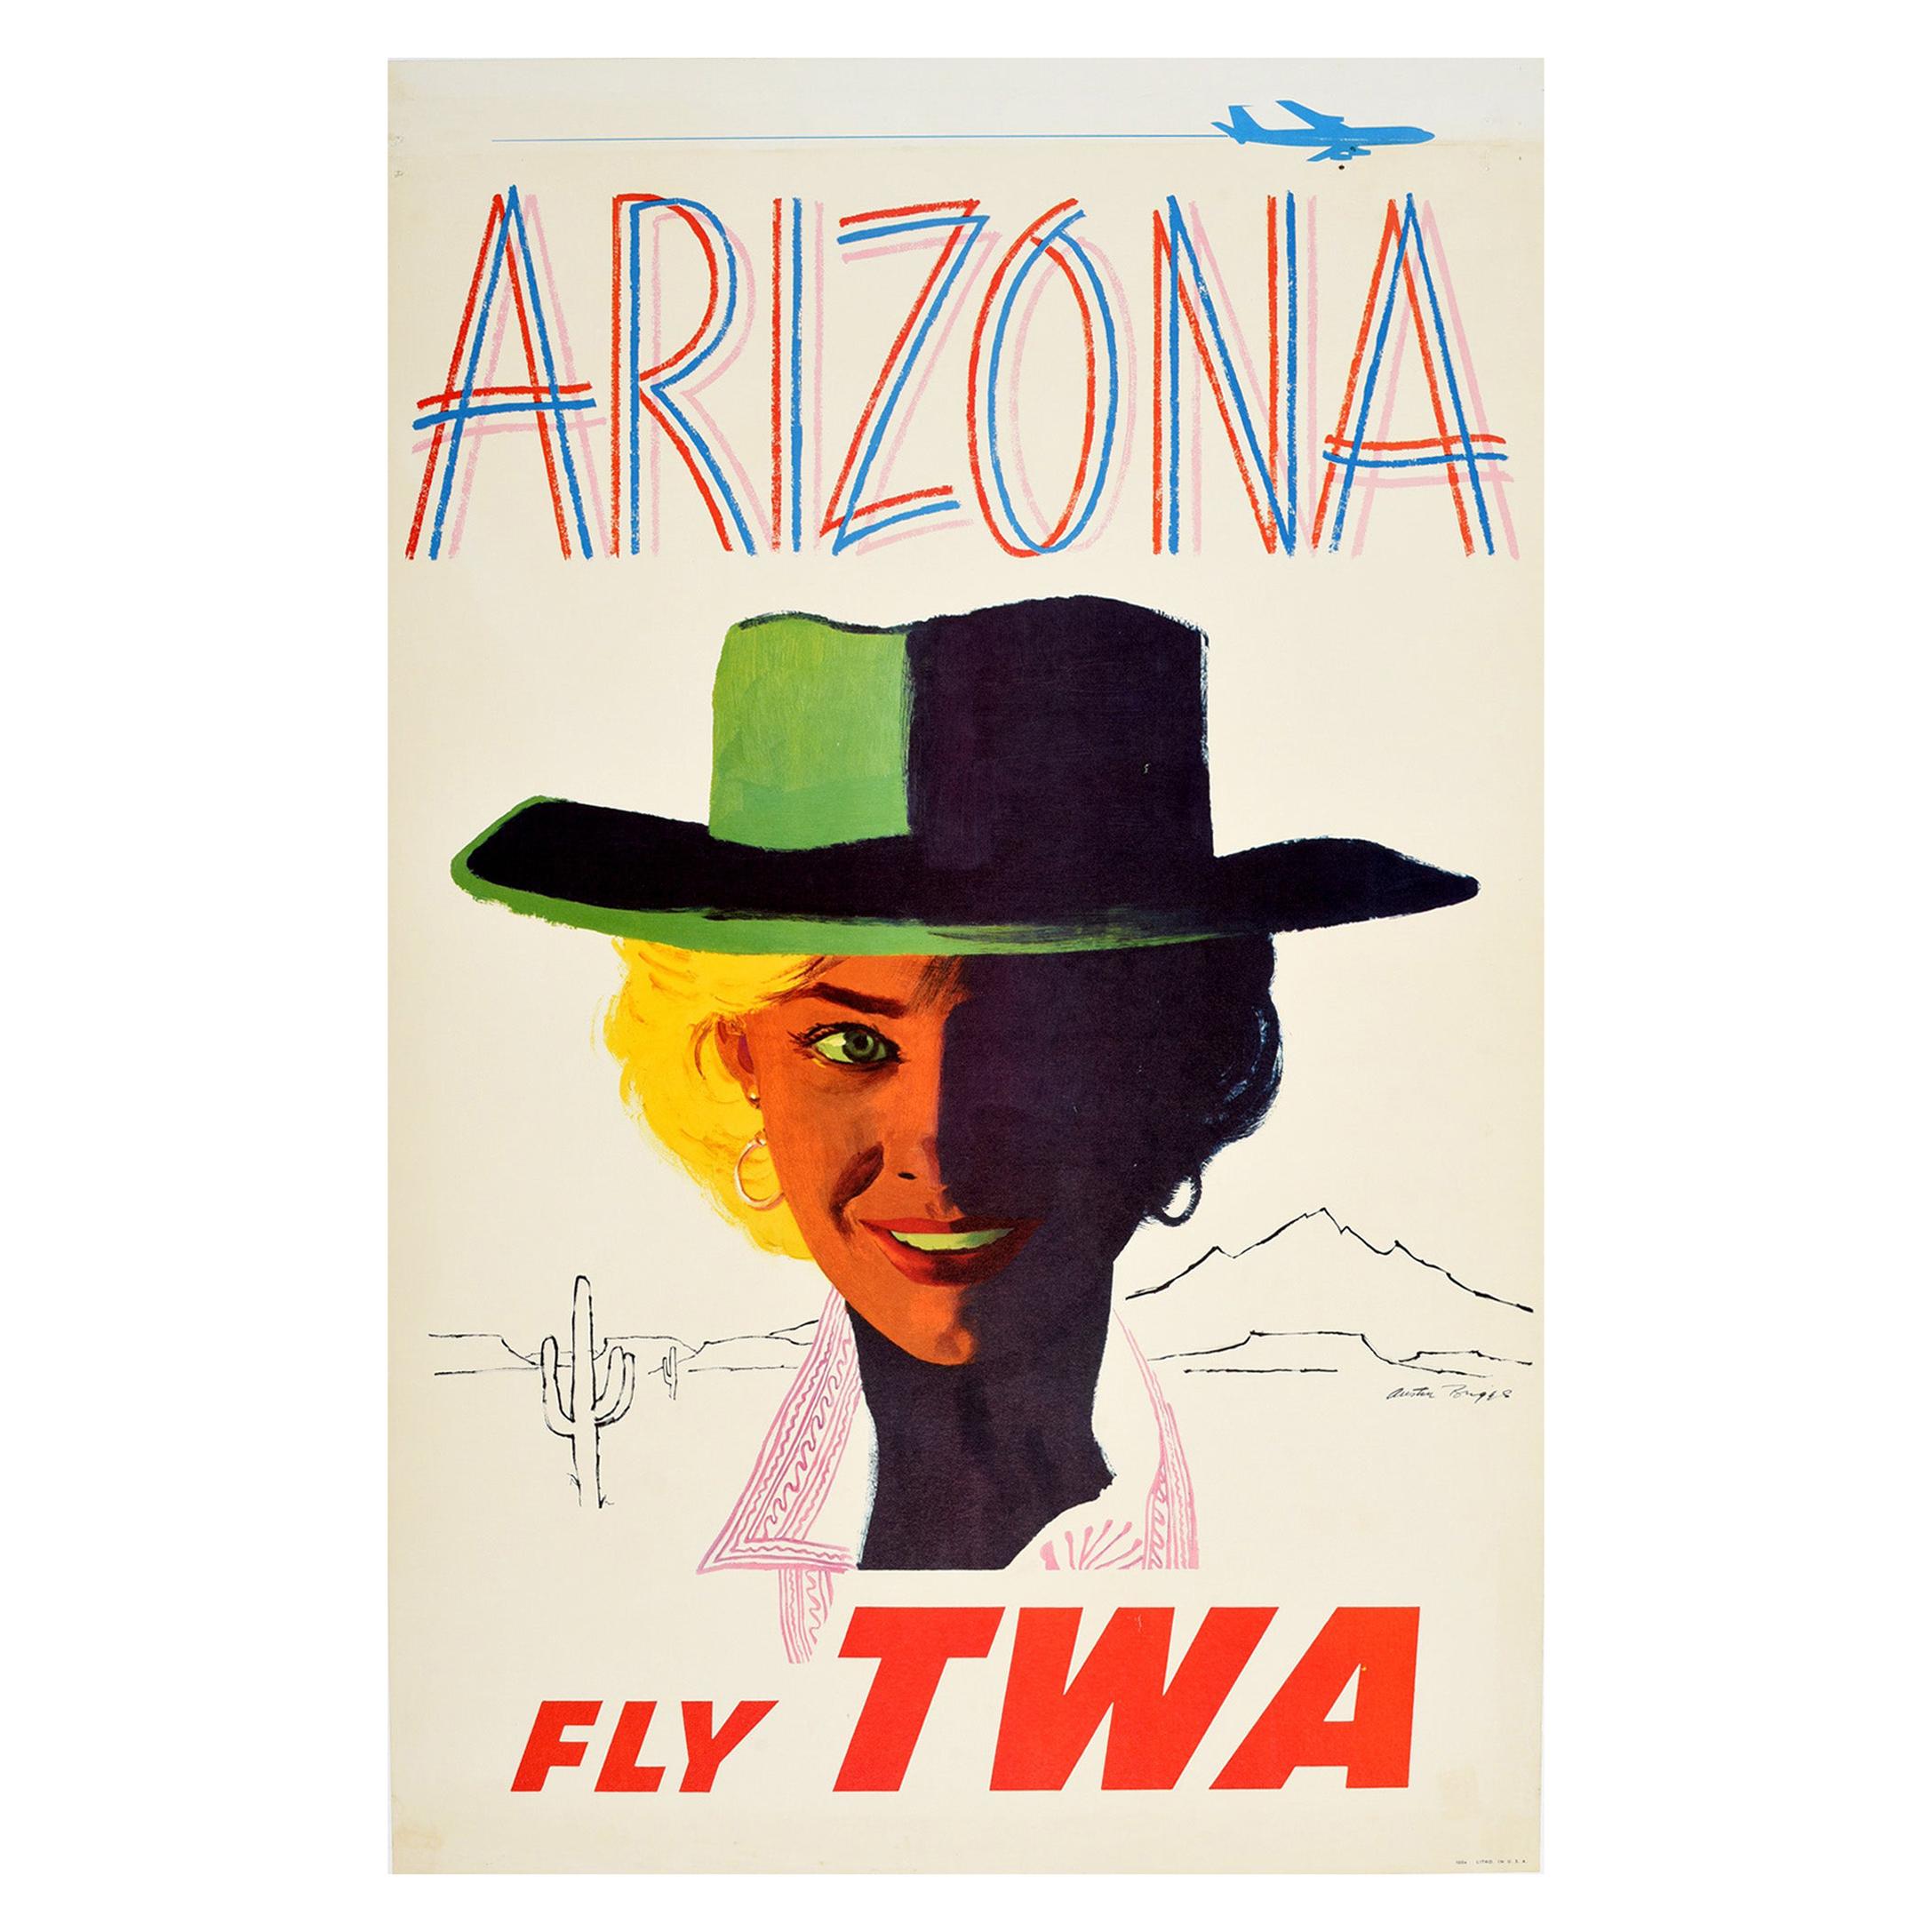 Original Vintage Poster Arizona Fly TWA Travel Advertising Trans World Airlines For Sale